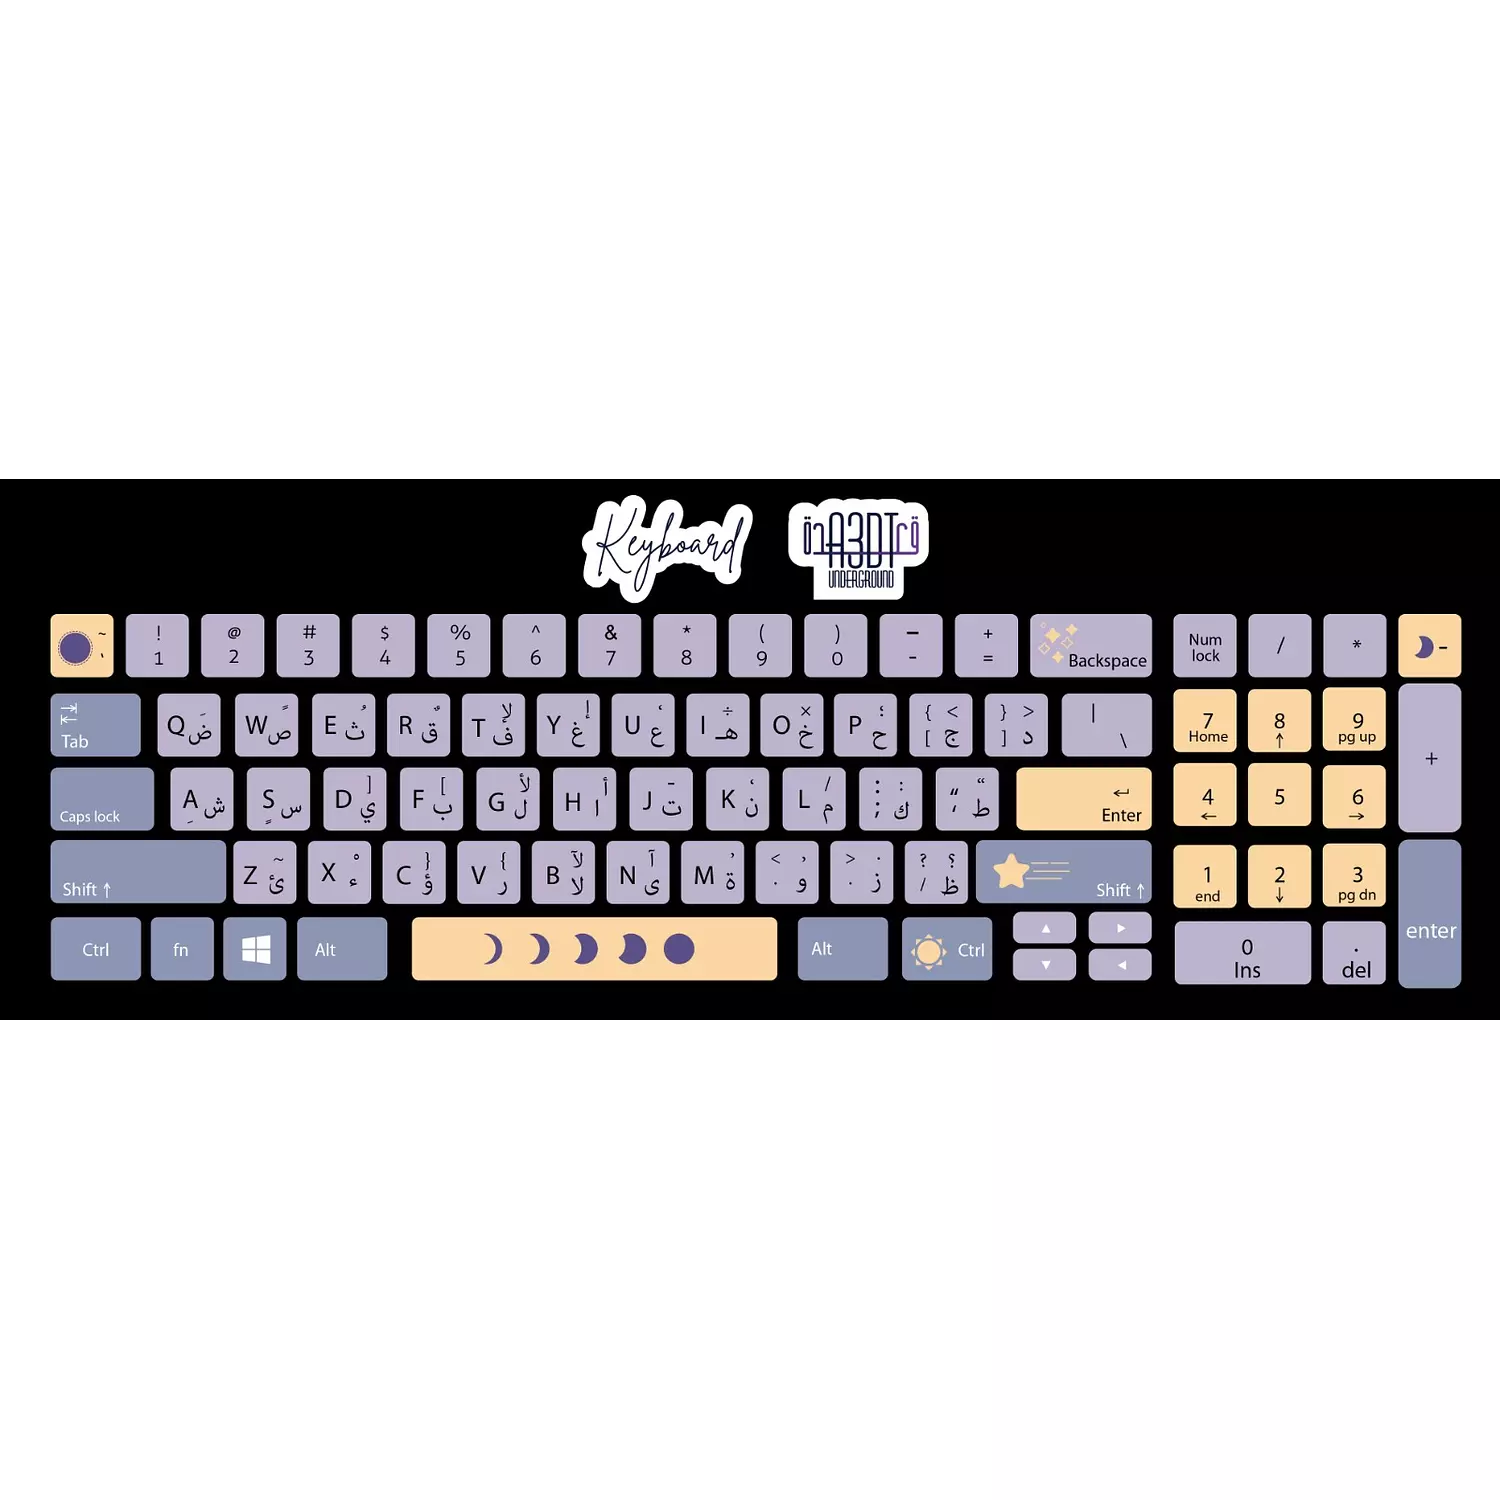 Moon keyboard sticker 🌕🌖🌙 hover image